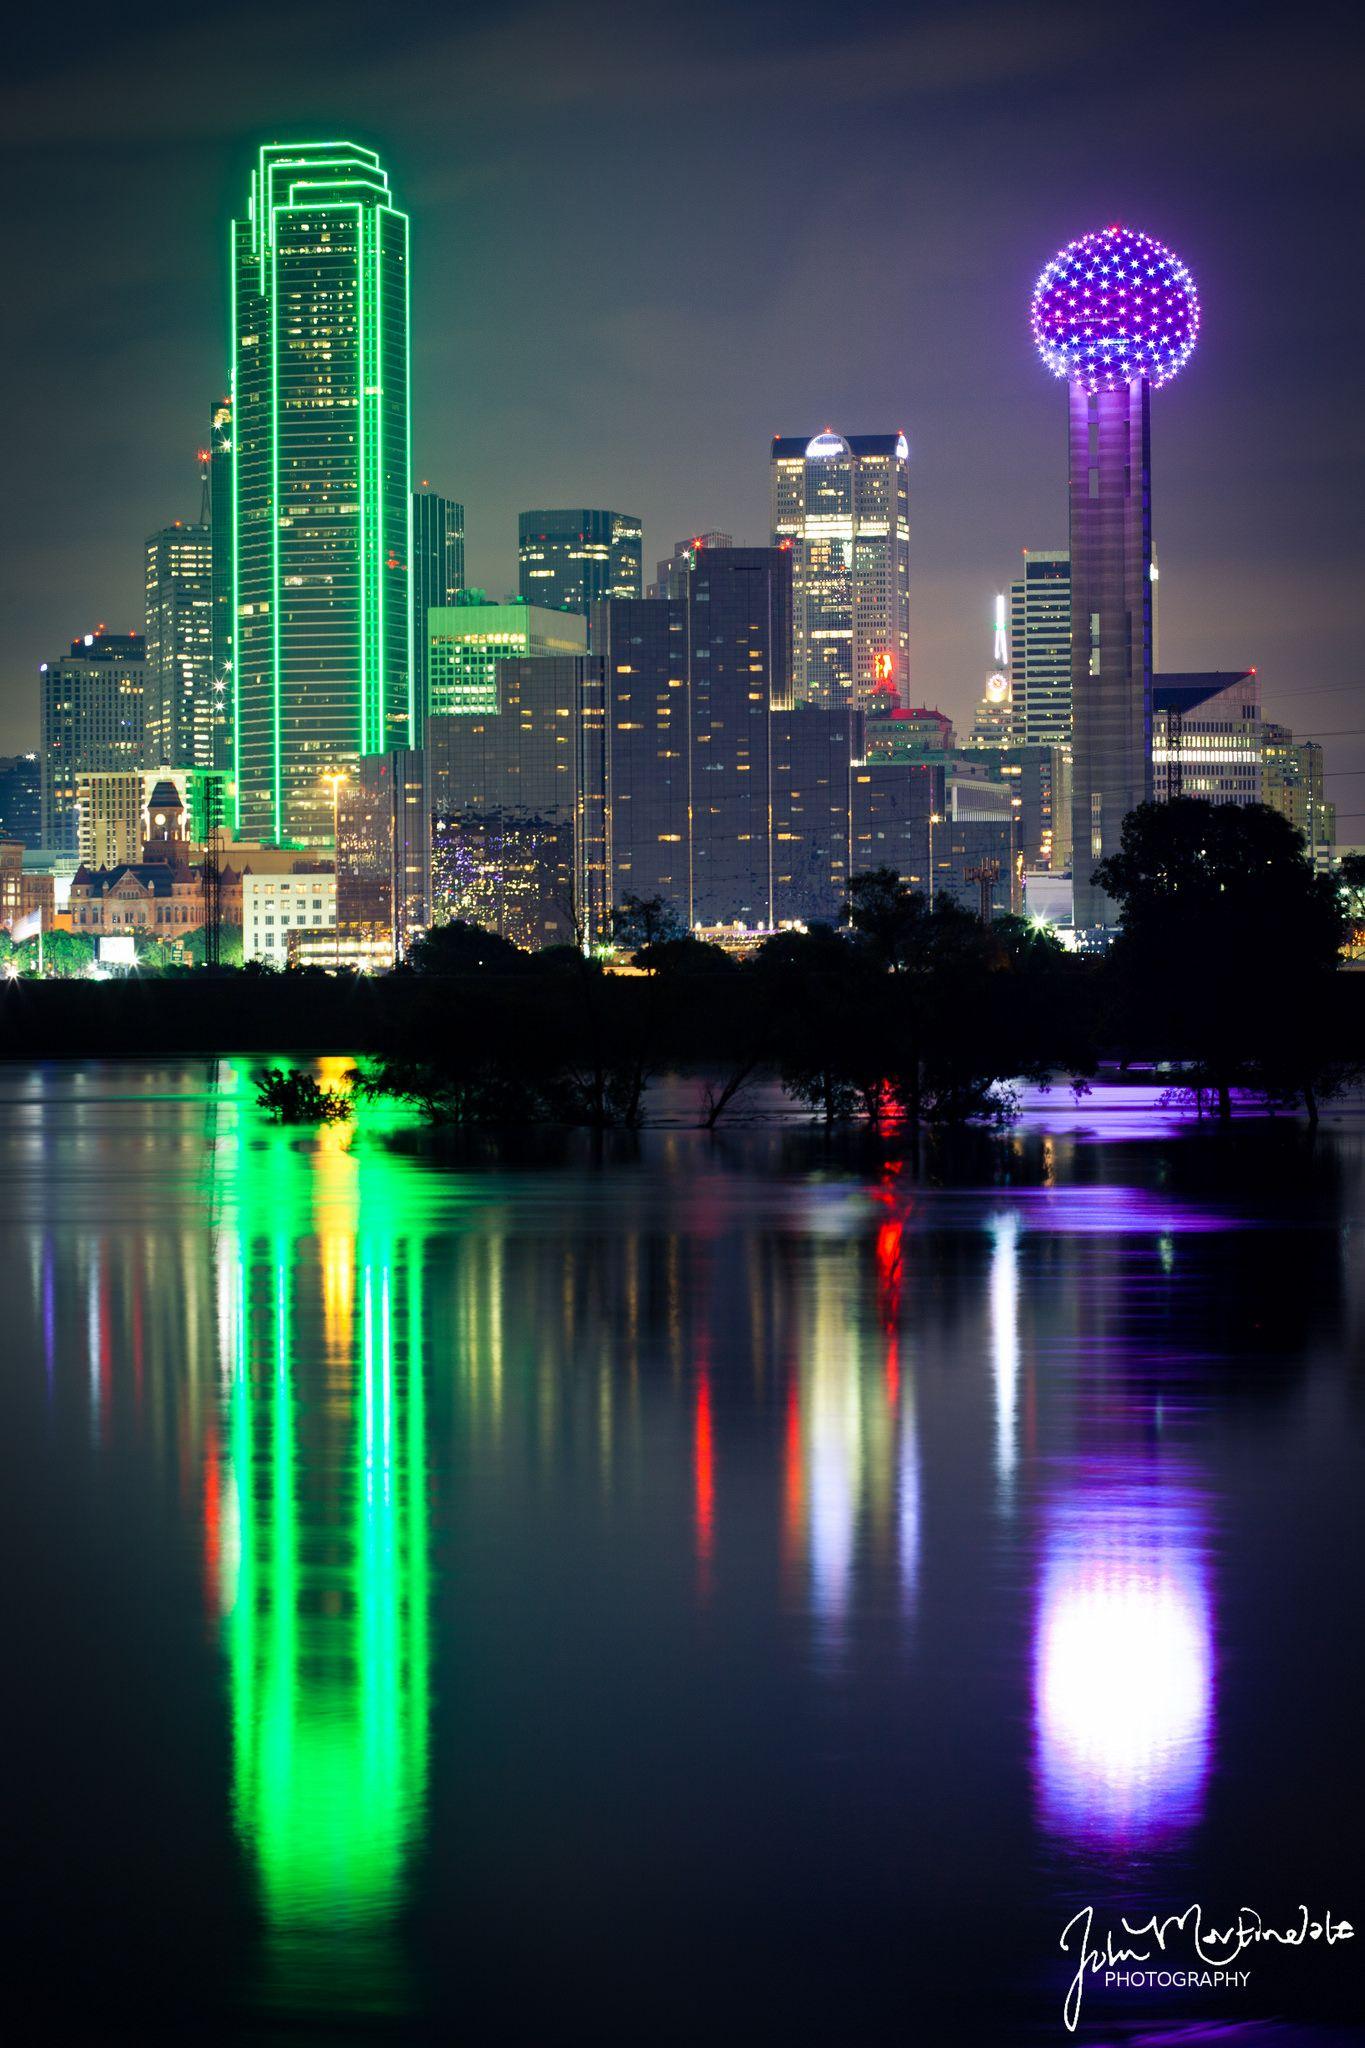 Dallas Reunion Tower Skyline At Night City In Texas United States 4k Ultra  Hd Desktop Wallpapers For Computers Laptop Tablet And Mobile Phones   Wallpapers13com